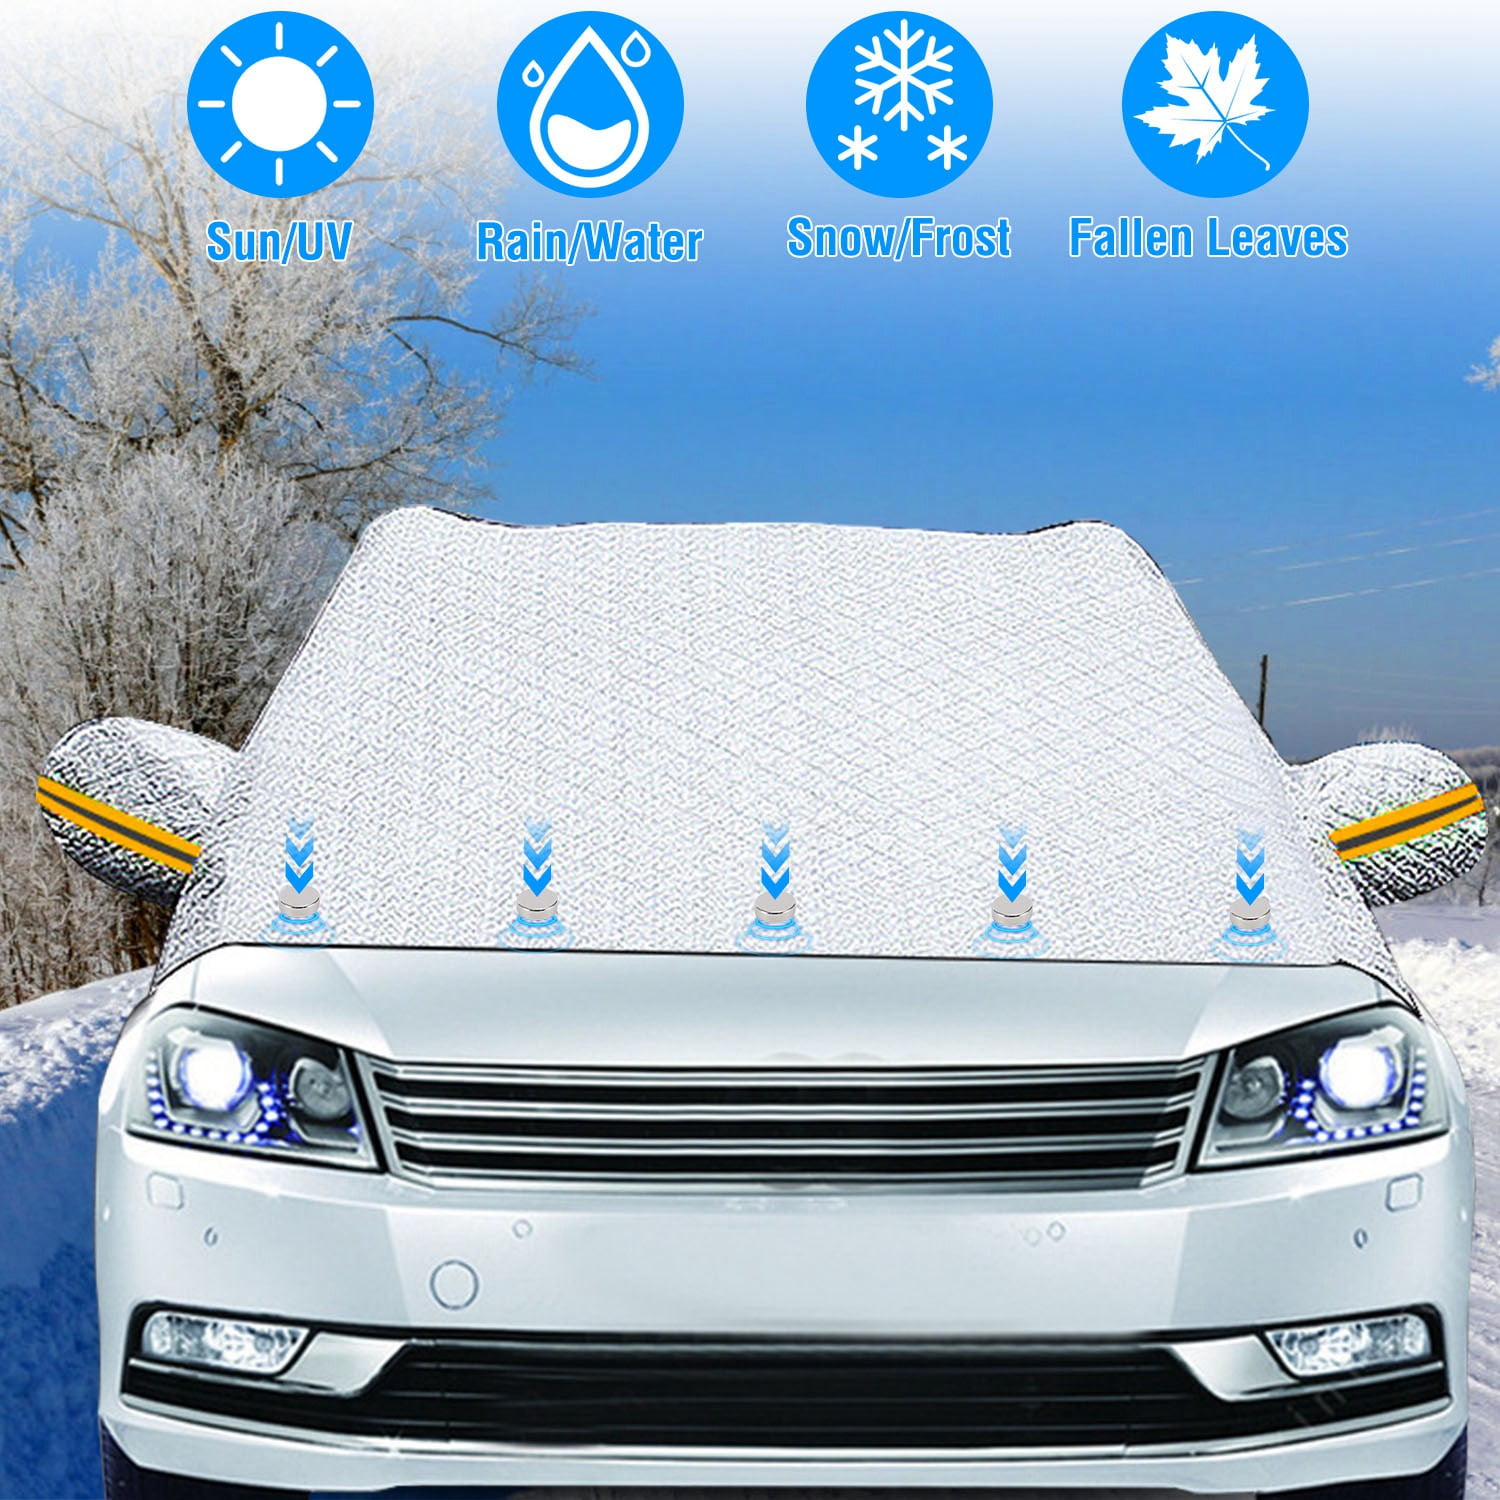 Car Windshield Cover for Ice and Snow, Magnetic Car Windshield Cover Snow  Frost Guard Car Window Covers Waterproof, Protect from Snow,Ice,Sun,Frost,  for Most Cars SUV Truck Vans (5 Magnetic Edges) : Automotive 